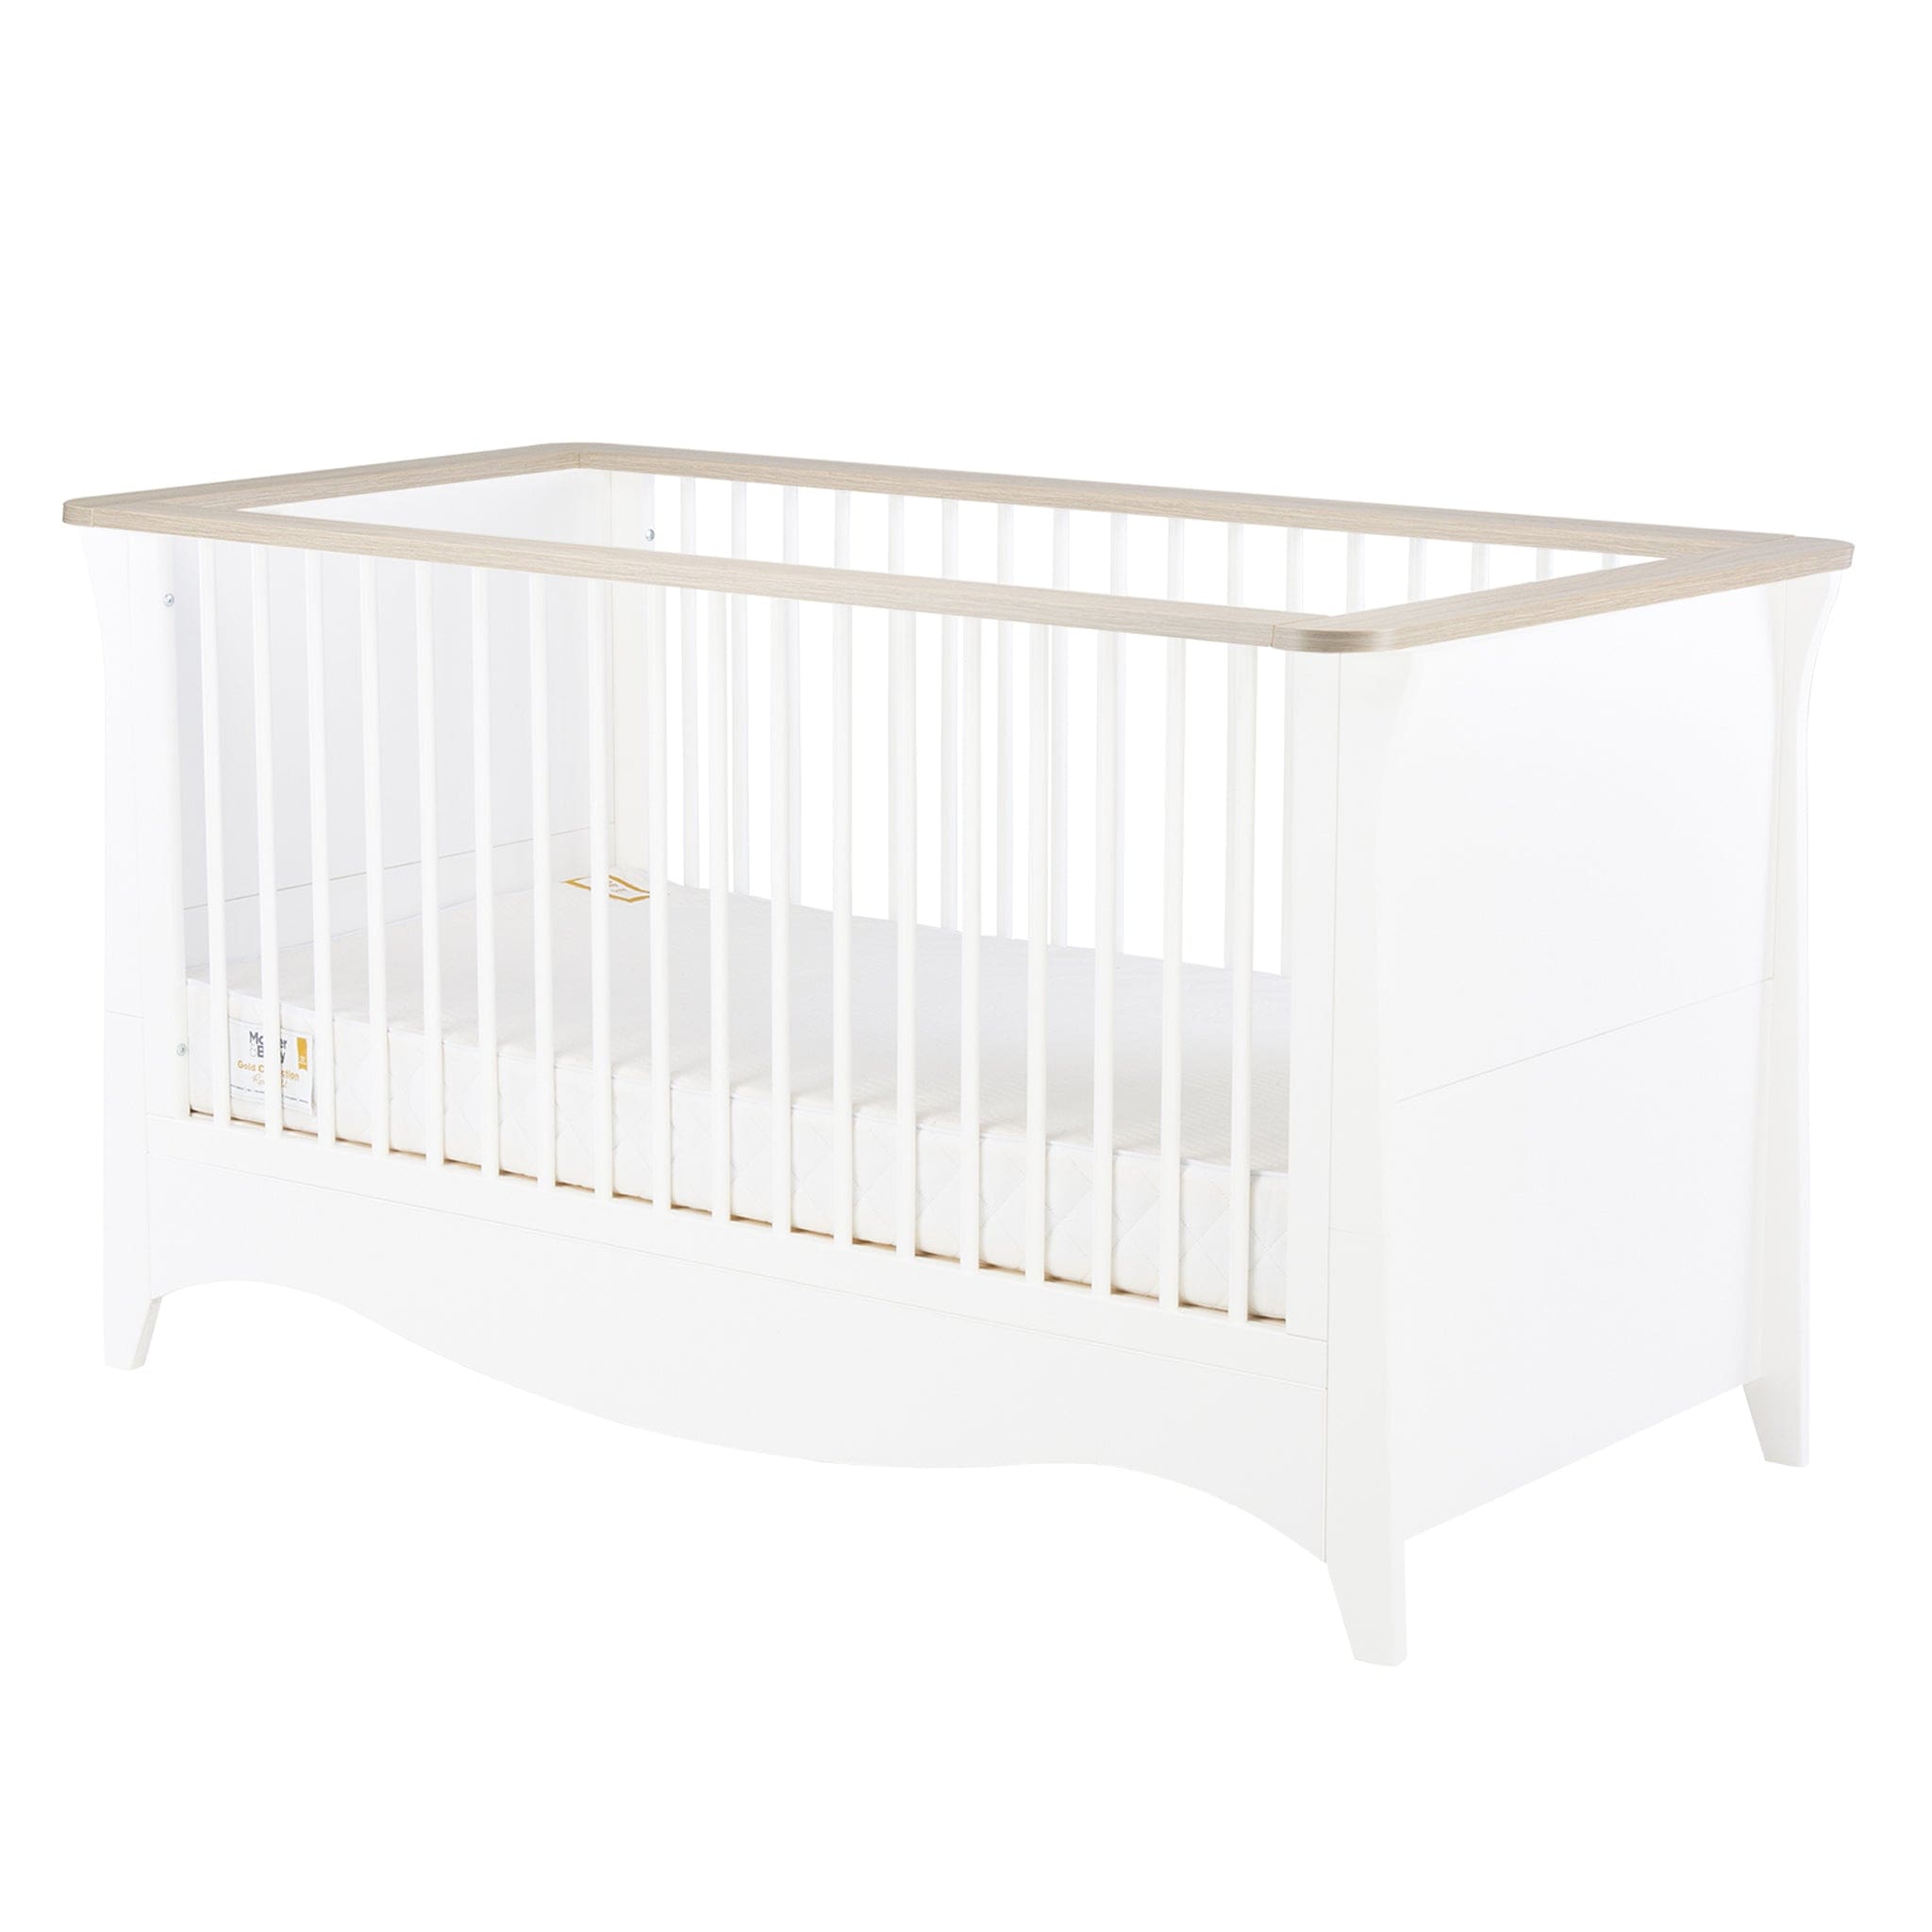 CuddleCo Clara 2 Piece Cot Bed Set in White & Ash Nursery Room Sets